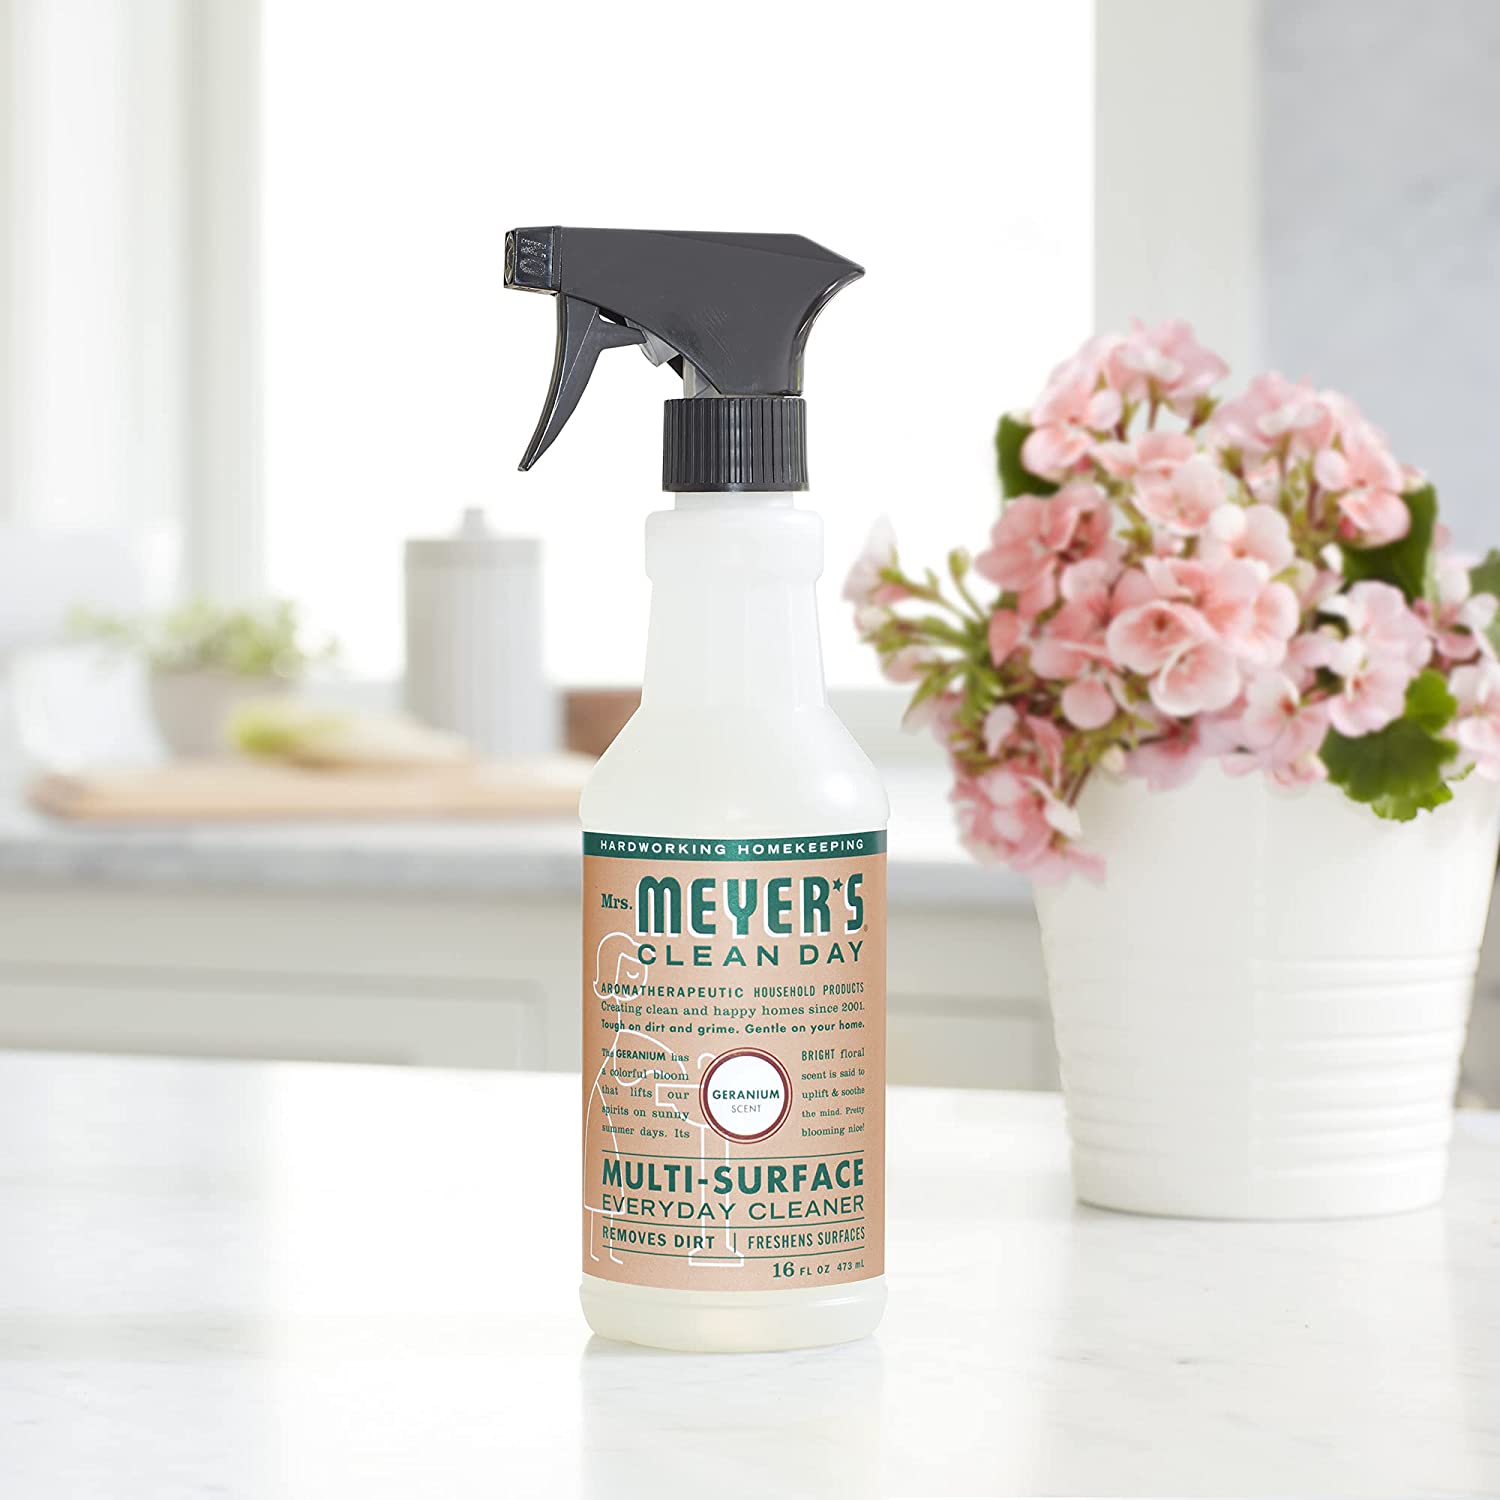 MRS. MEYER'S CLEAN DAY Multi-Surface Cleaner in Geranium